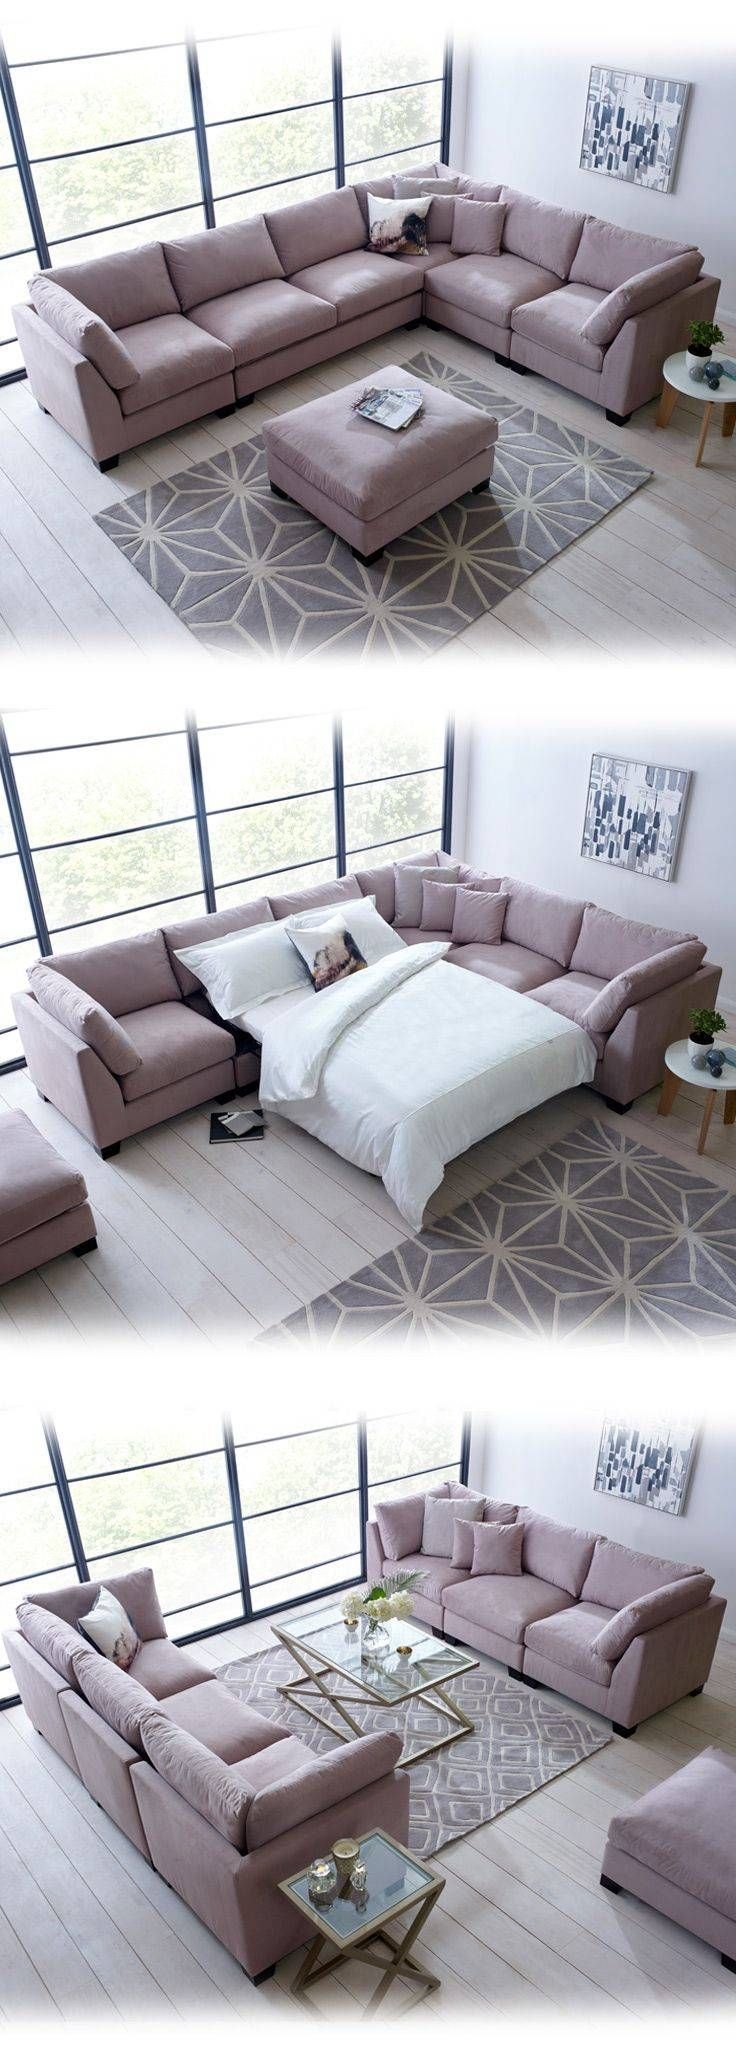 Best 25+ Sofa Beds Ideas On Pinterest | Sofa With Bed Inside Sofas With Beds (View 29 of 30)